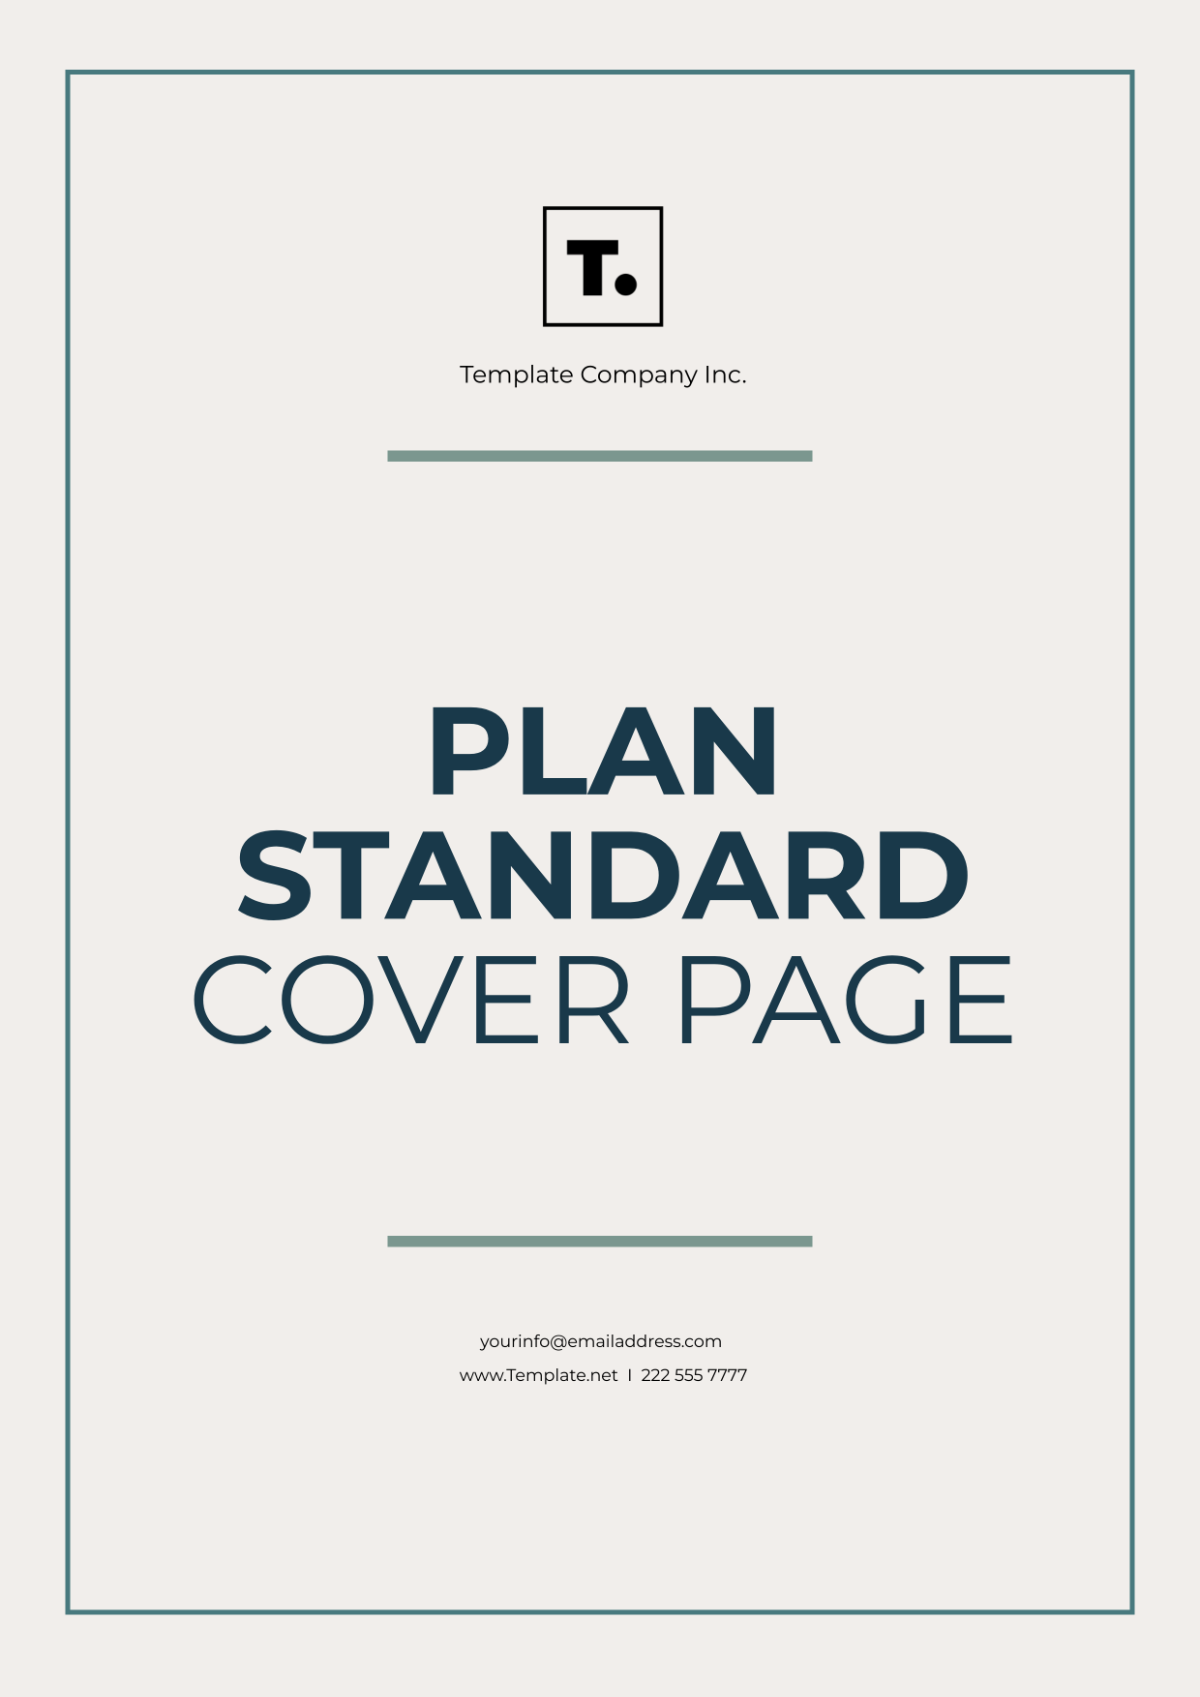 Plan Standard Cover Page Template